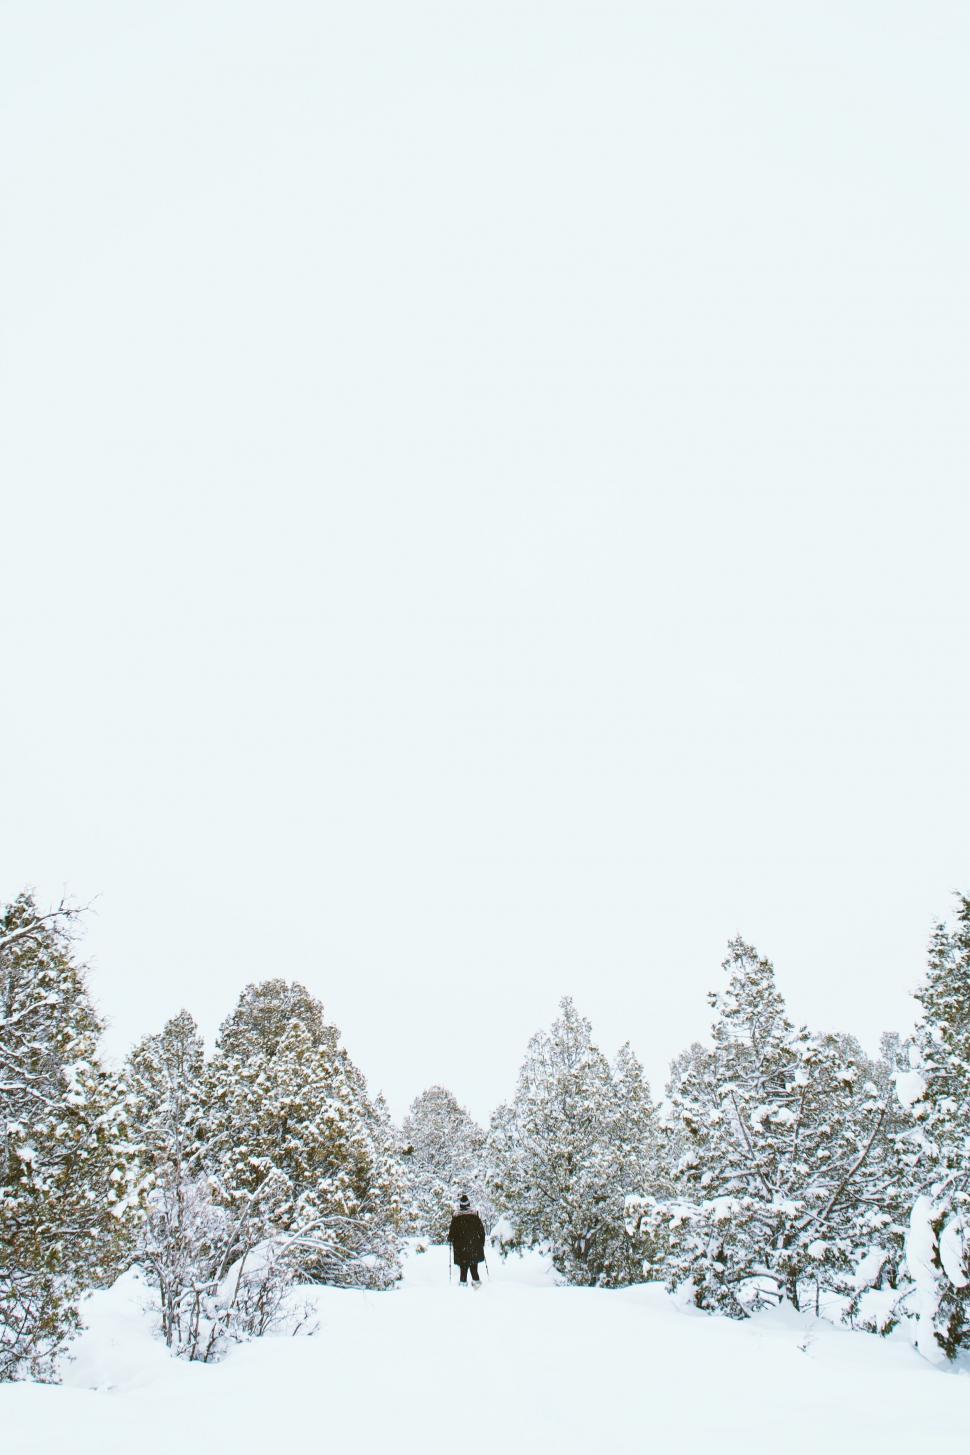 Free Image of Lone figure in a snowy forest landscape 